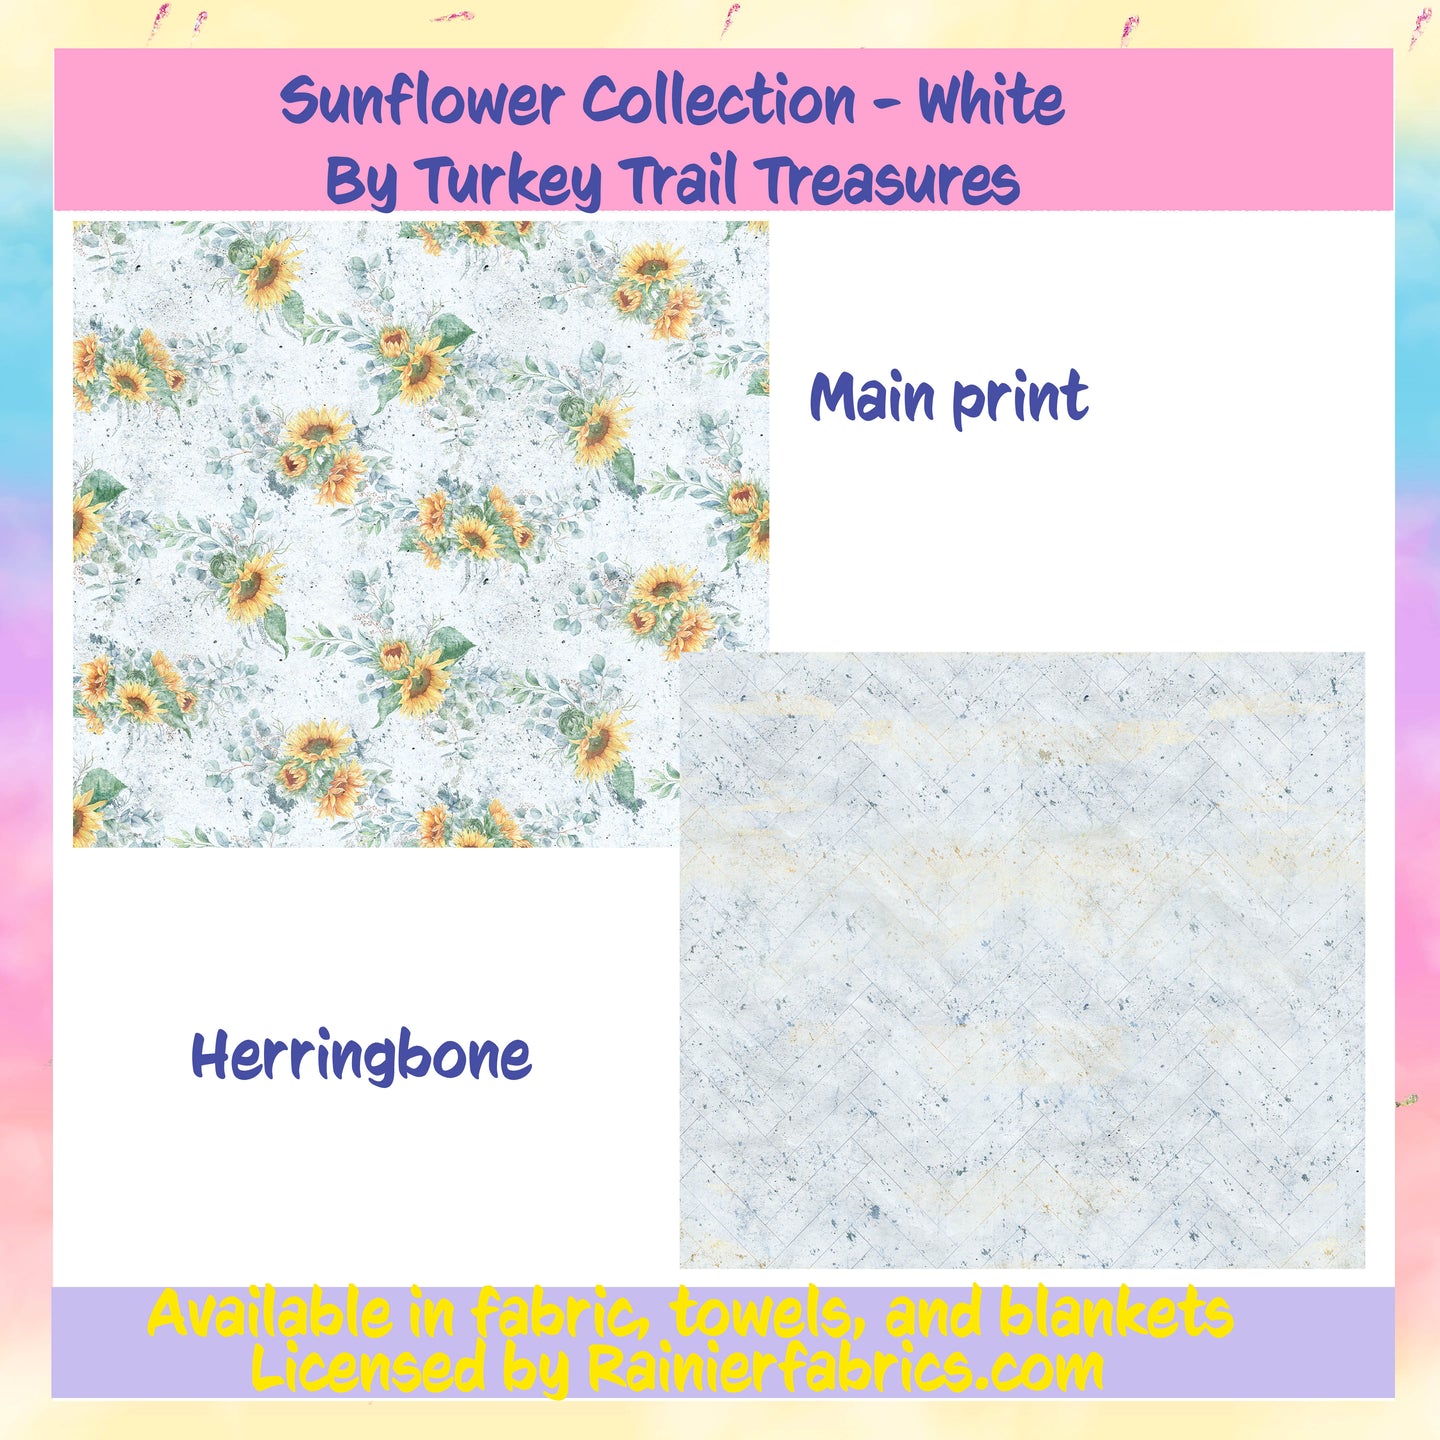 Sunflower White Collection - from Turkey Trail Treasures - 2-5 day turnaround - Order by 1/2 yard; Description of bases below